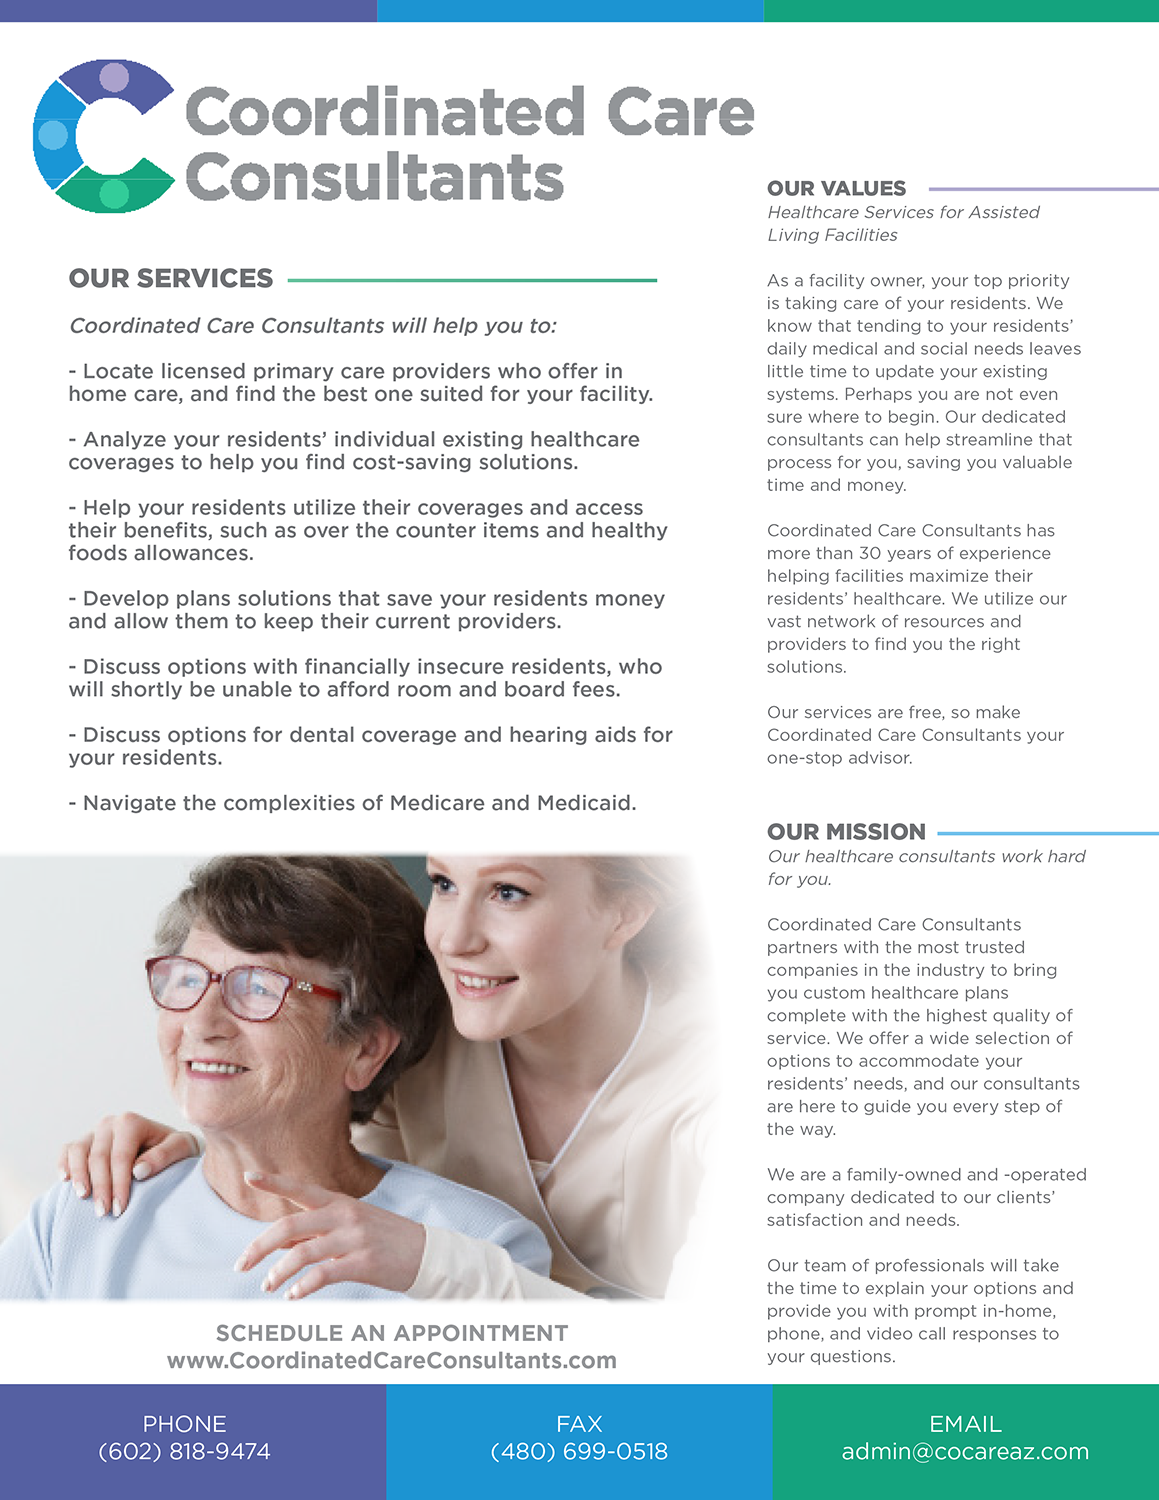 Coordinated Care Consultants Flyer